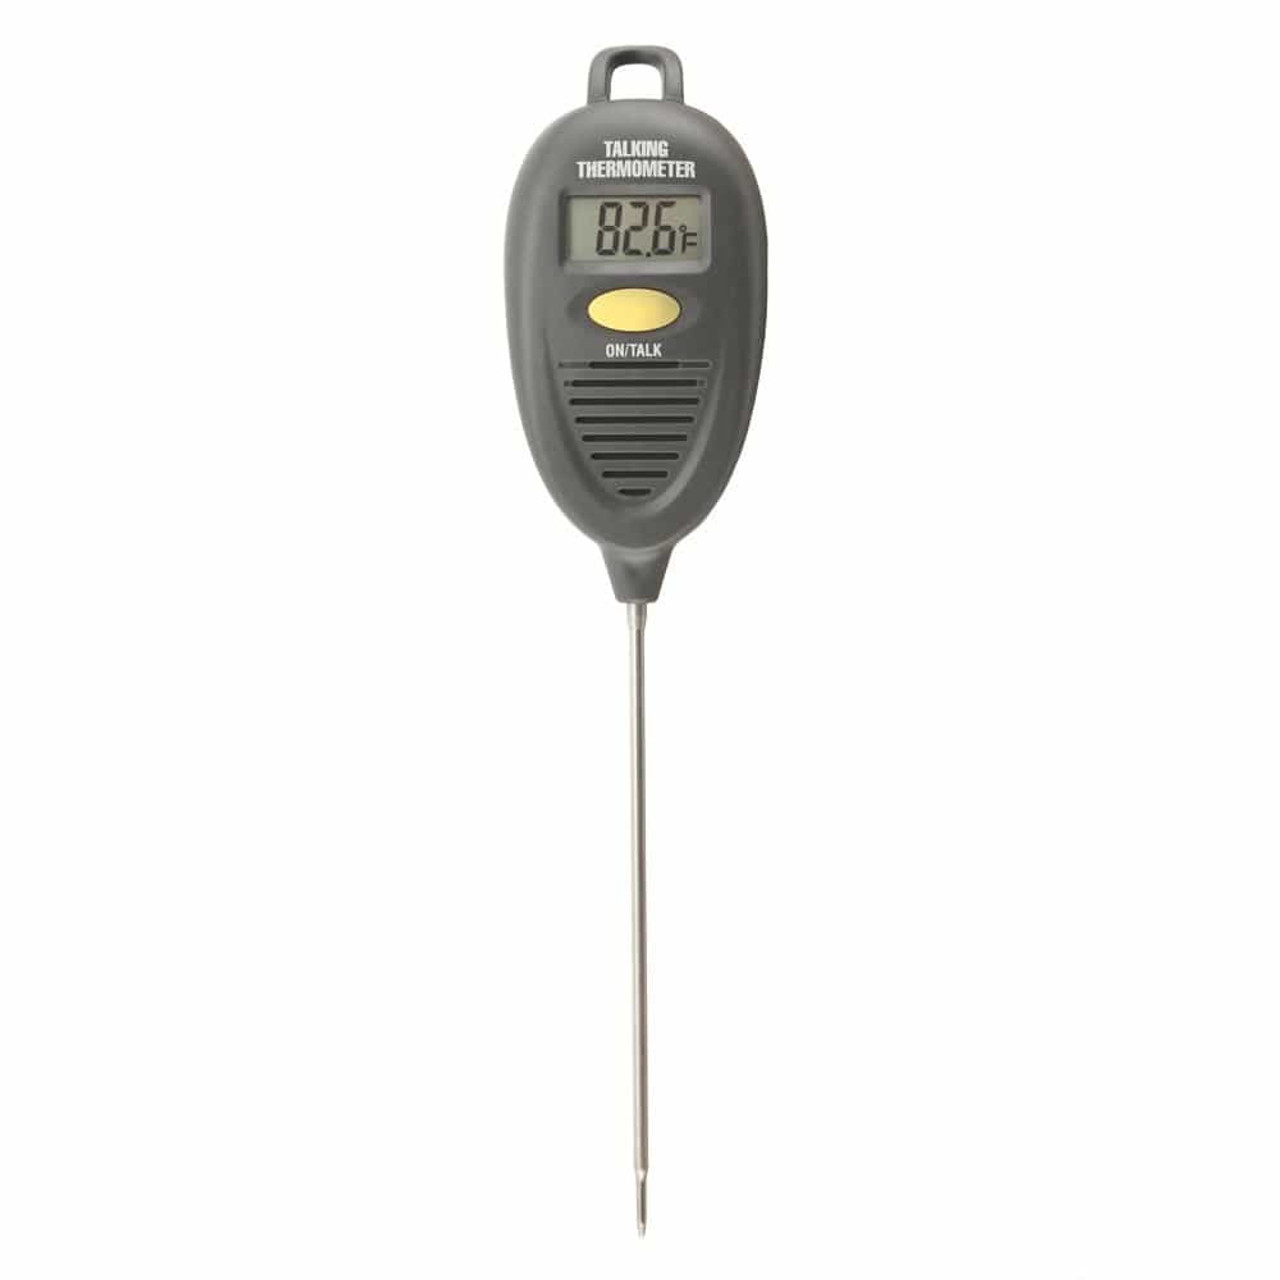 Talking Thermometer (RT8400)